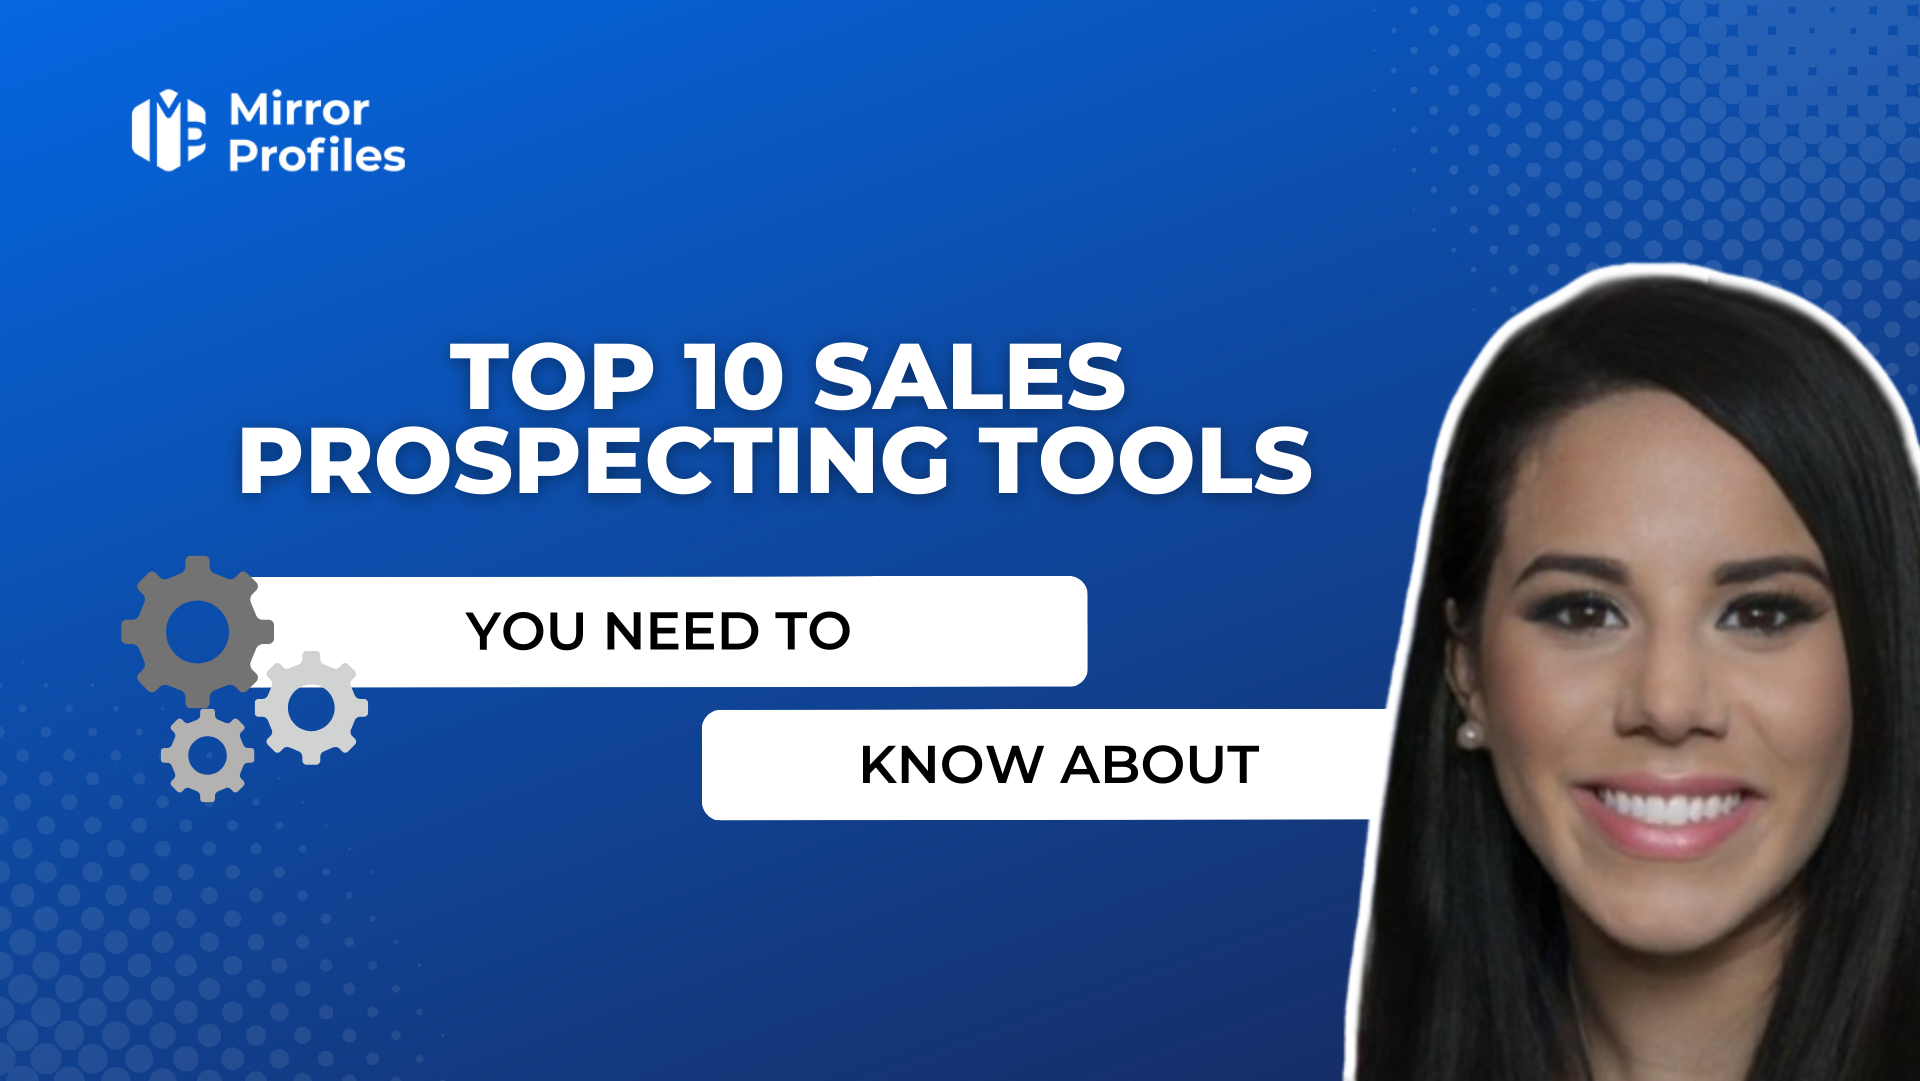 Top 10 sales prospecting tools you need to know about